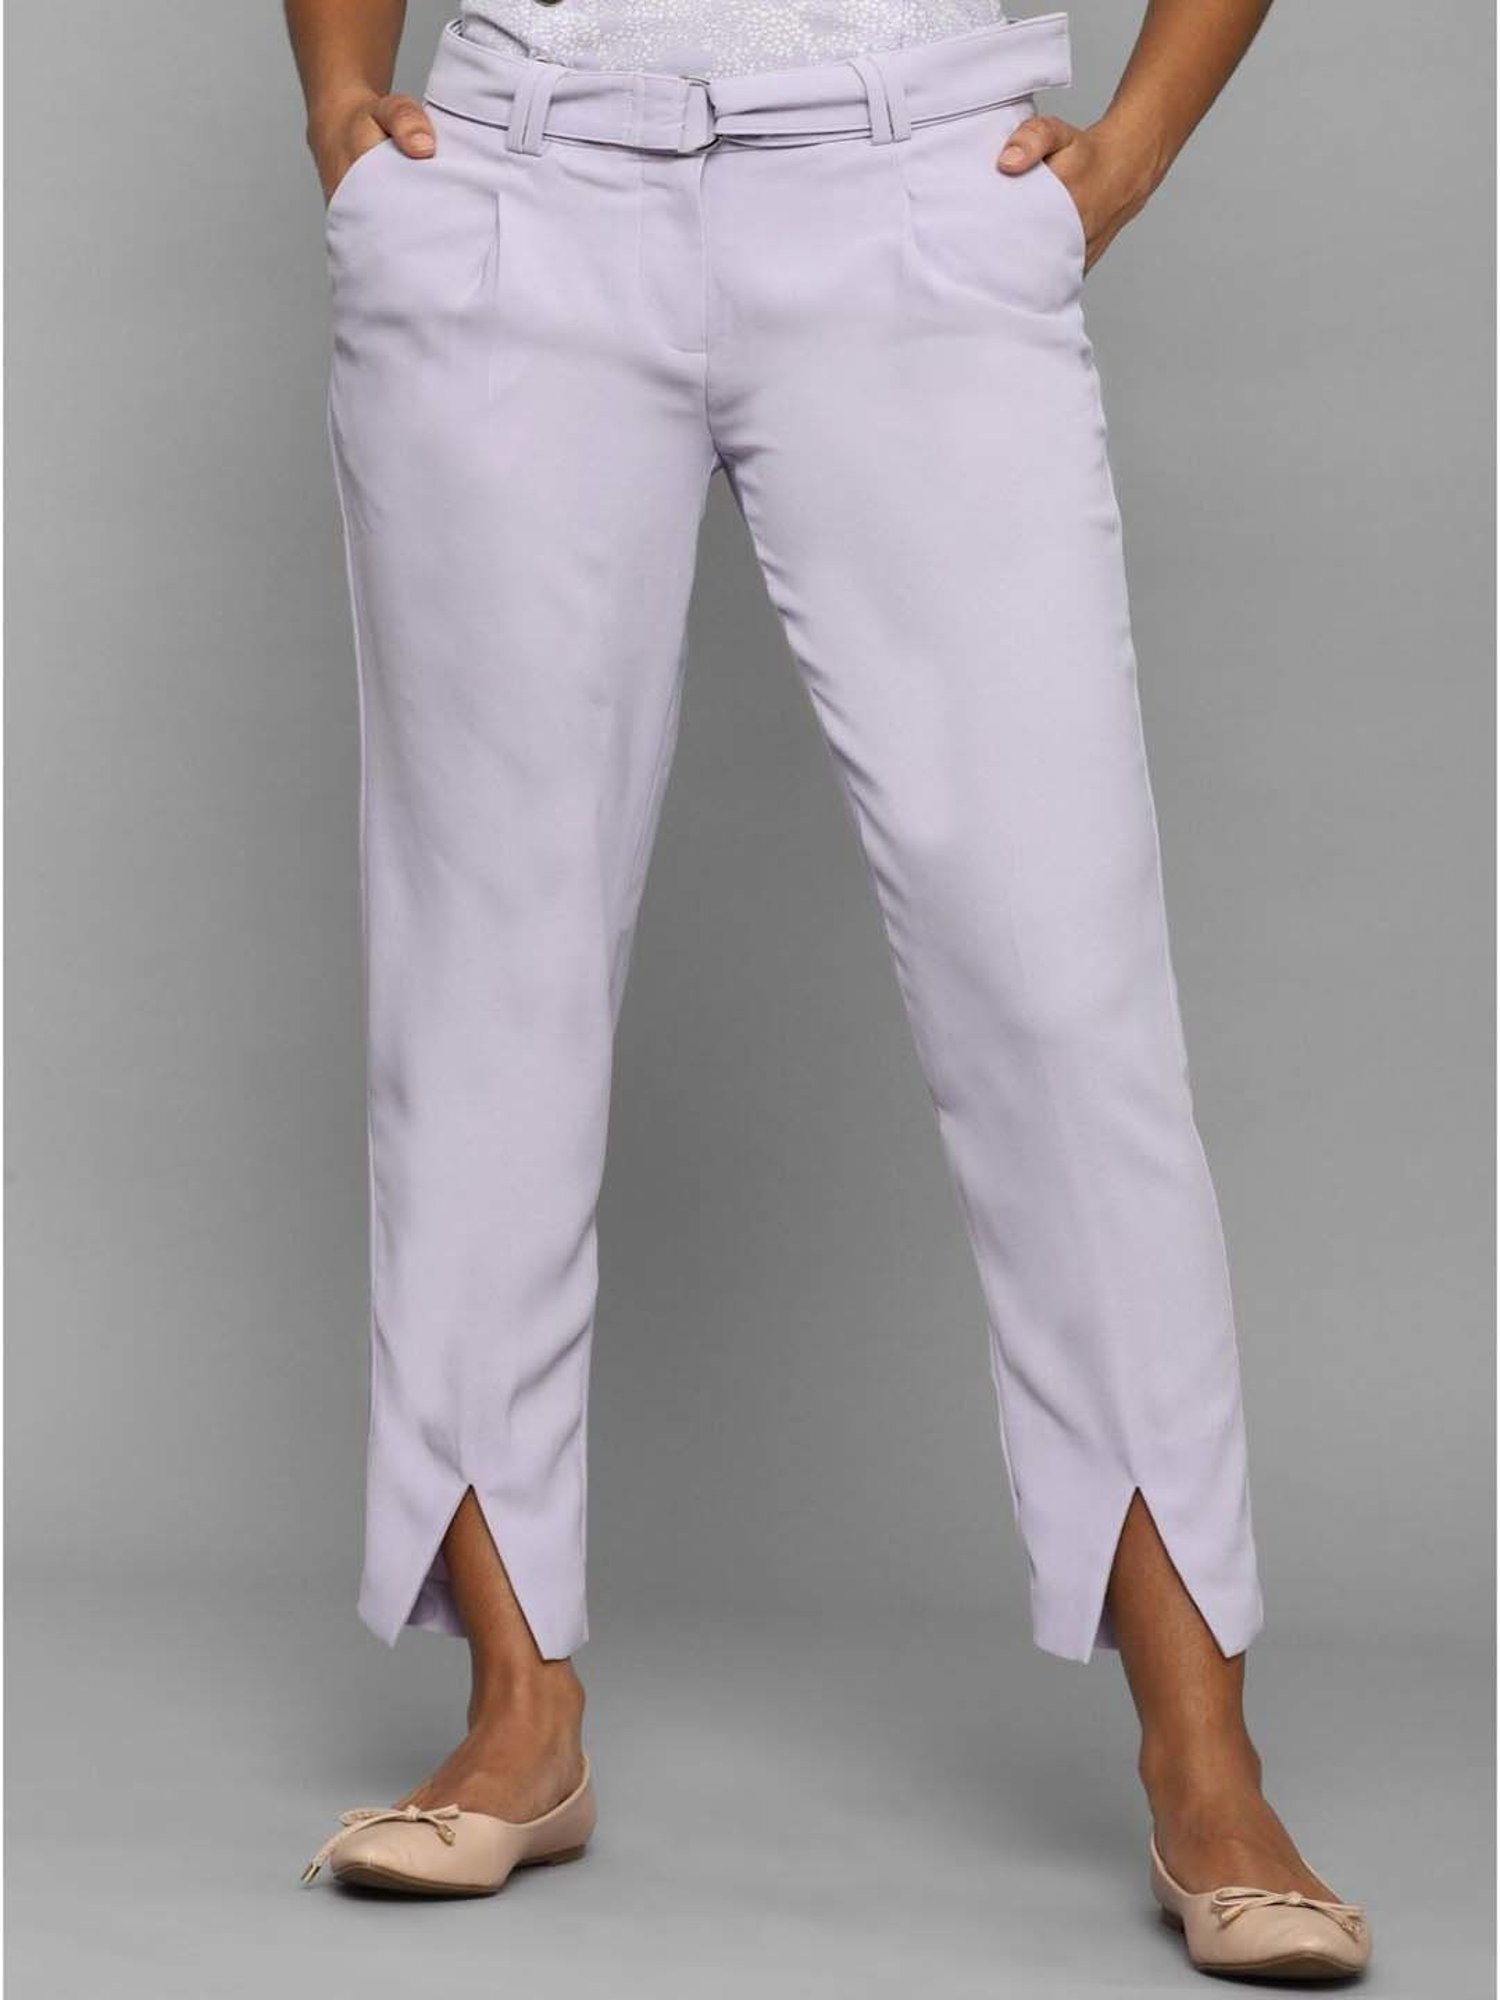 Allen Solly Trousers and Pants  Buy Allen Solly Women Beige Regular Fit  Casual Trouser Online  Nykaa Fashion